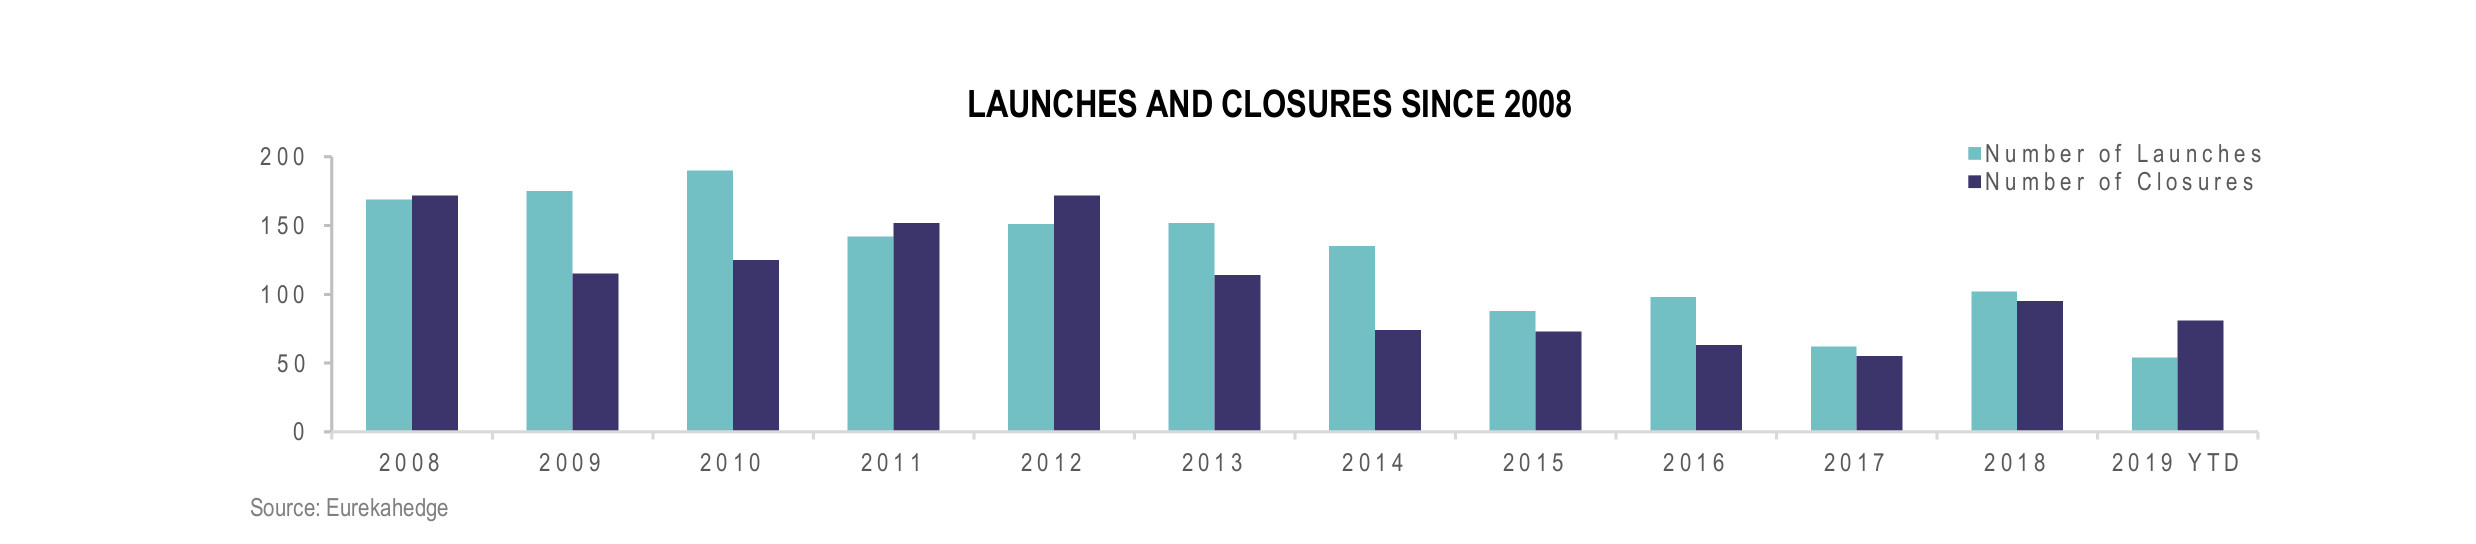 Asian Hedge Funds Infographic January 2020 - Launches and closures